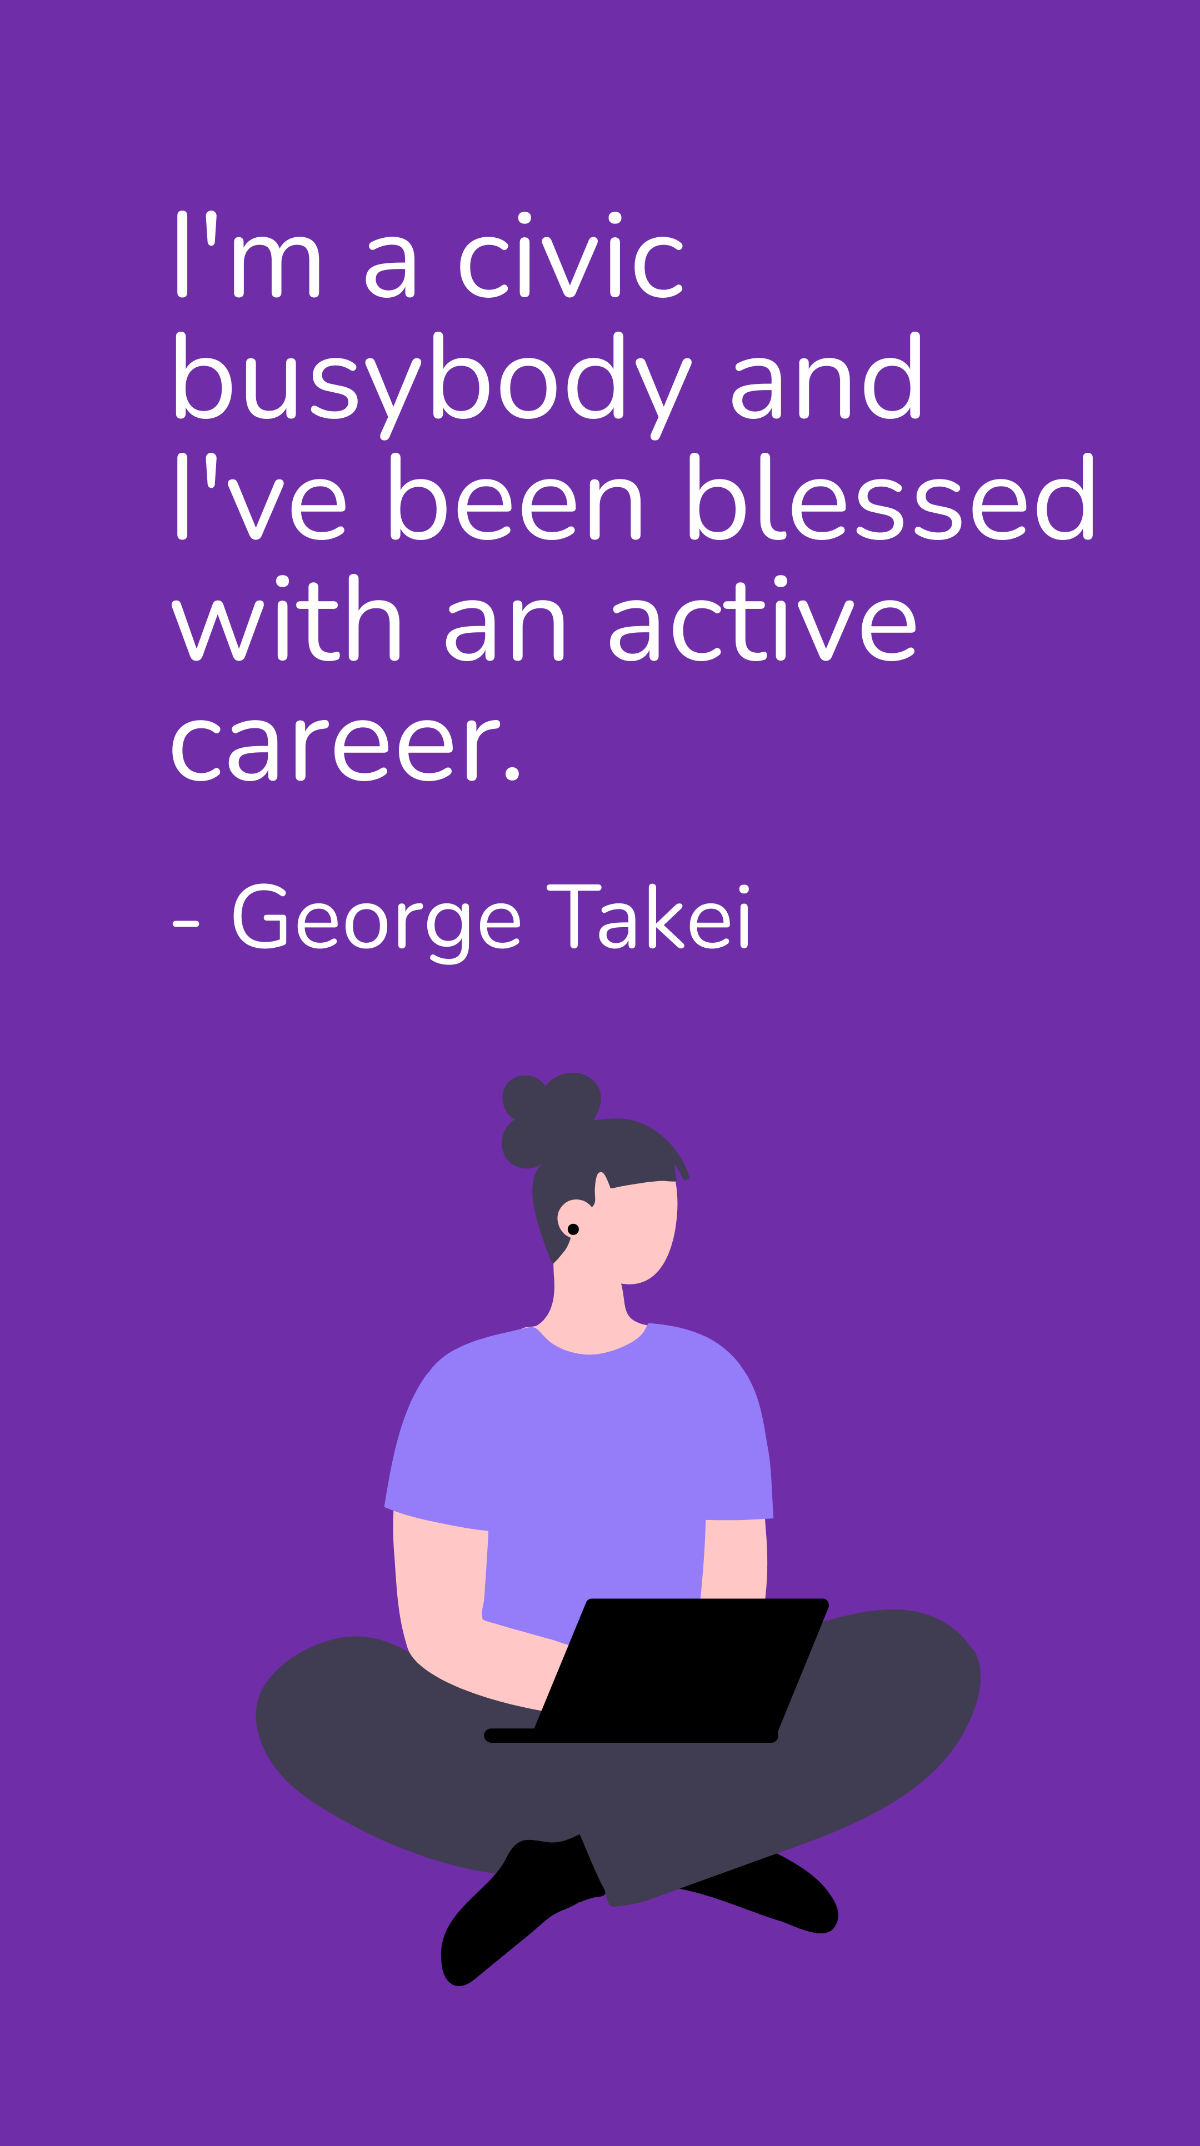 Free George Takei - I'm a civic busybody and I've been blessed with an active career. Template